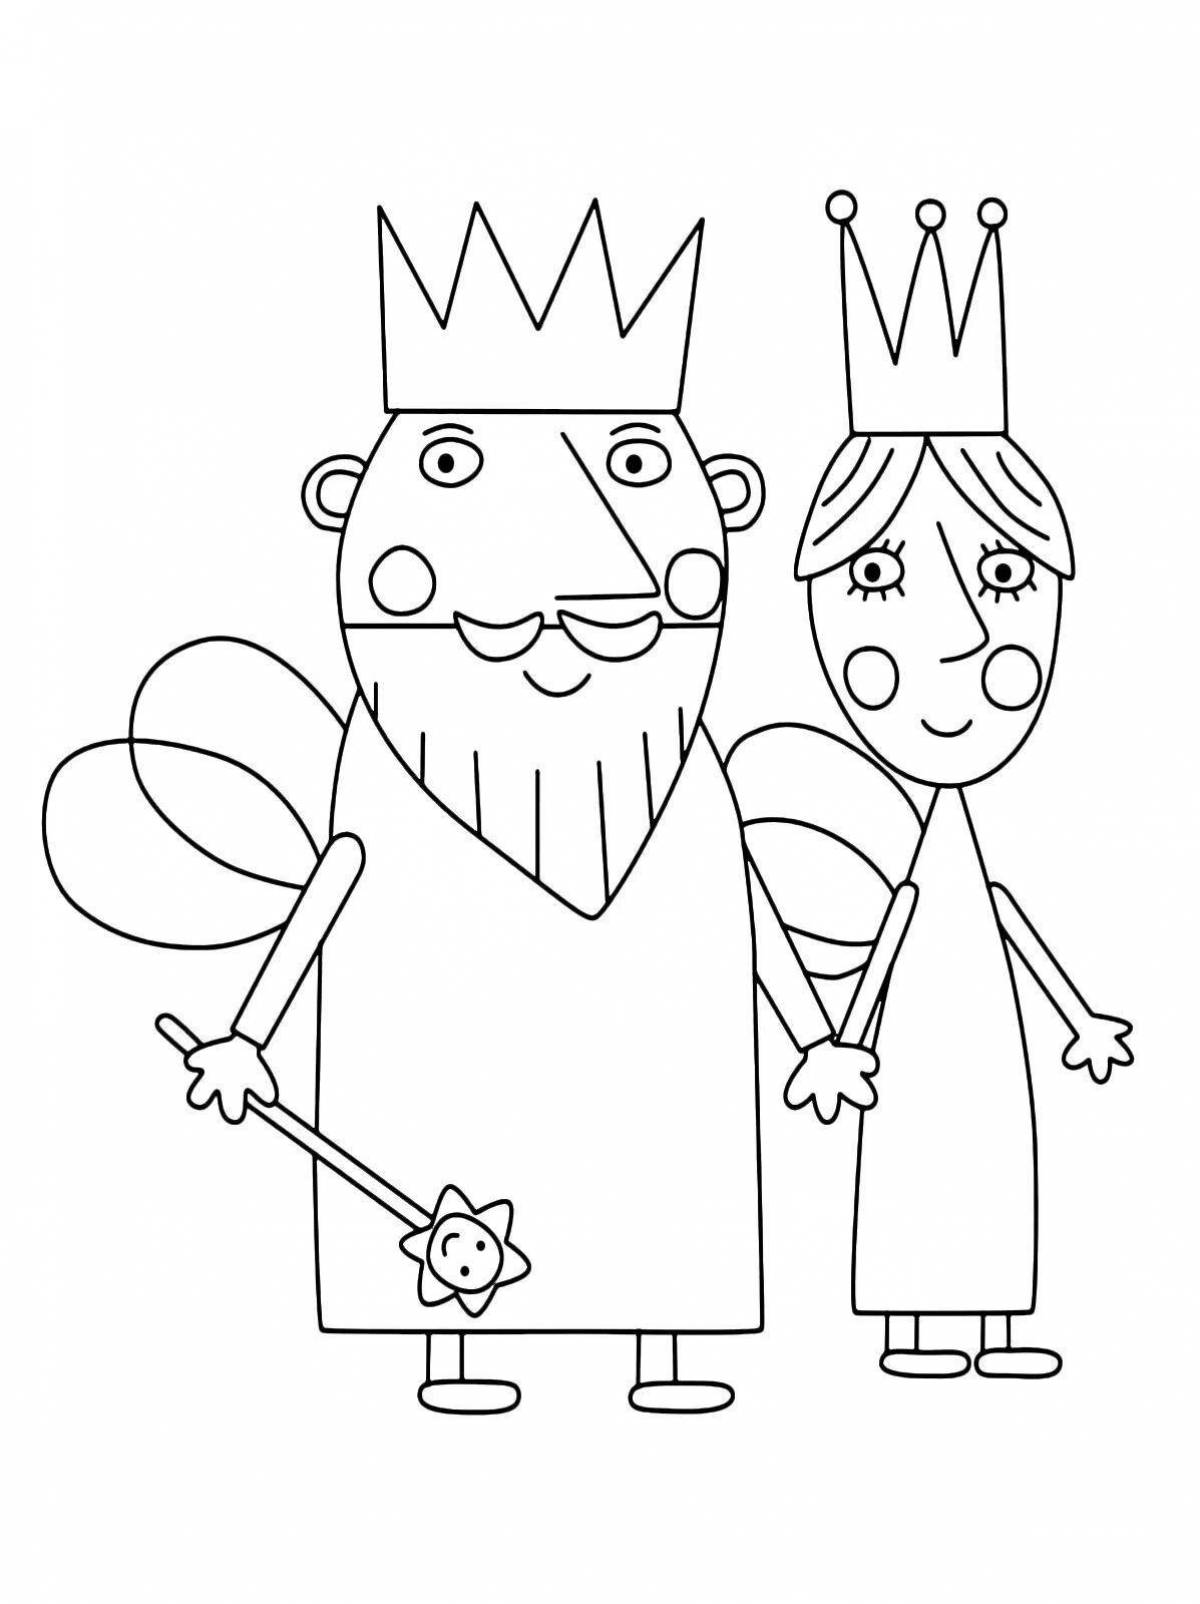 Fairytale king and queen coloring book